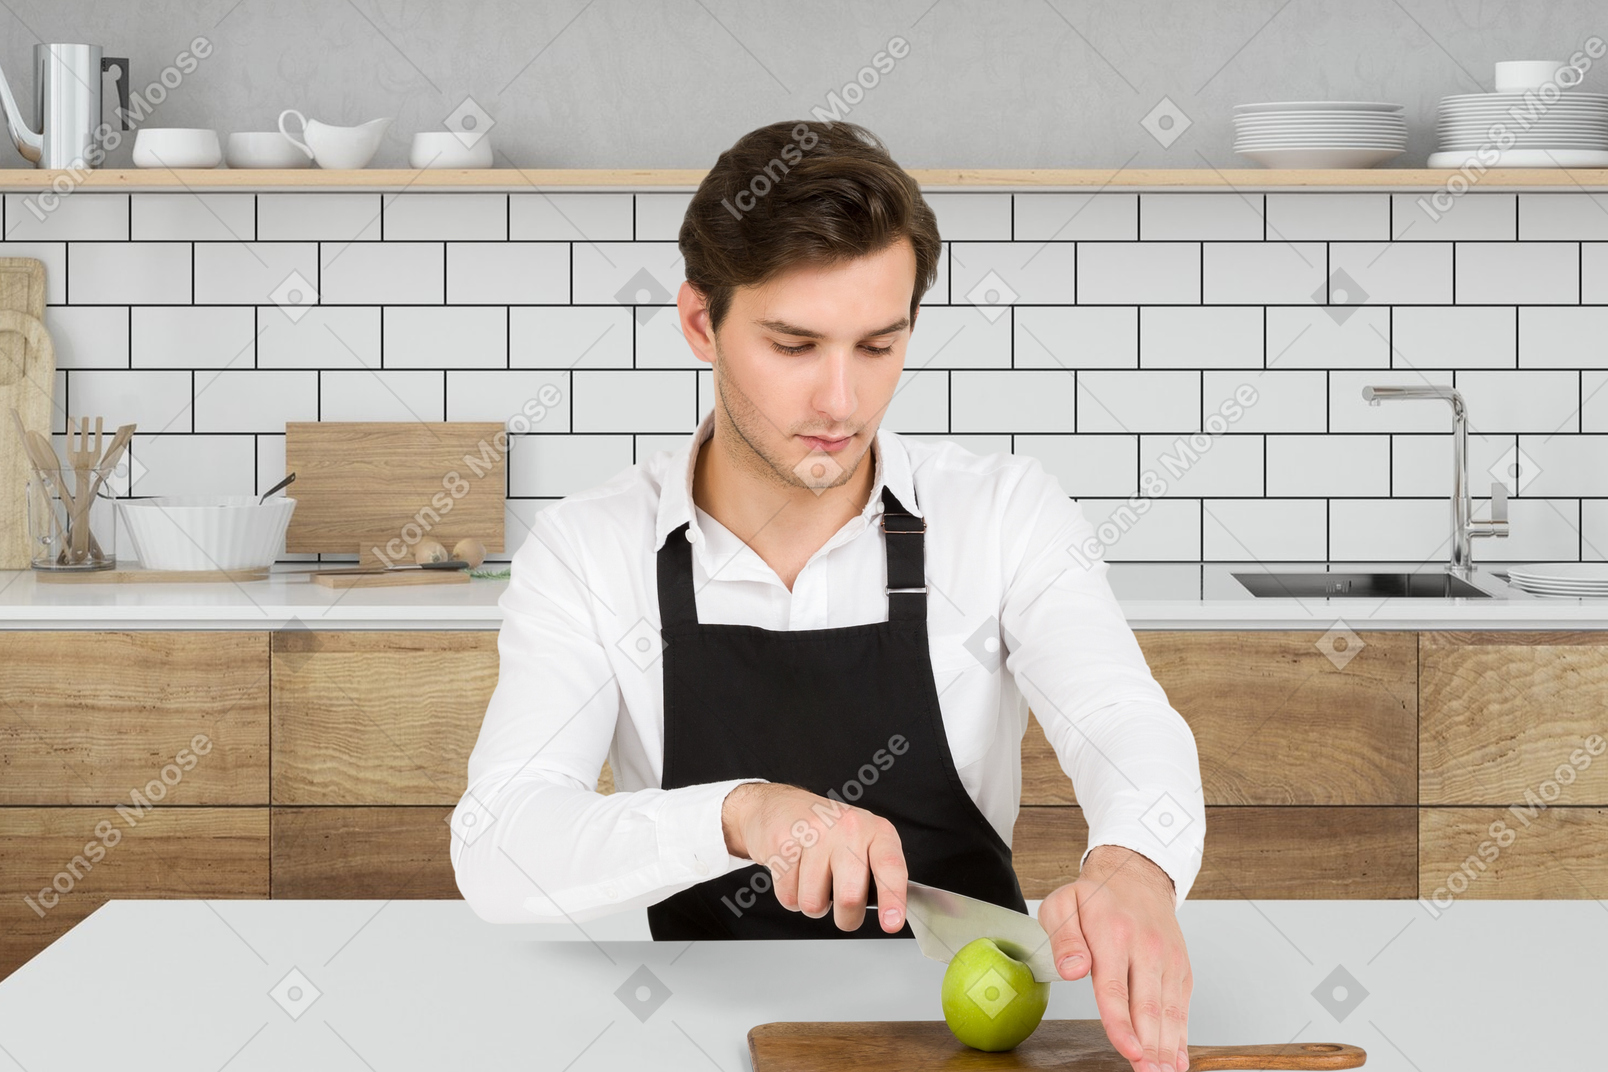 Woman working on a laptop in the kitchen